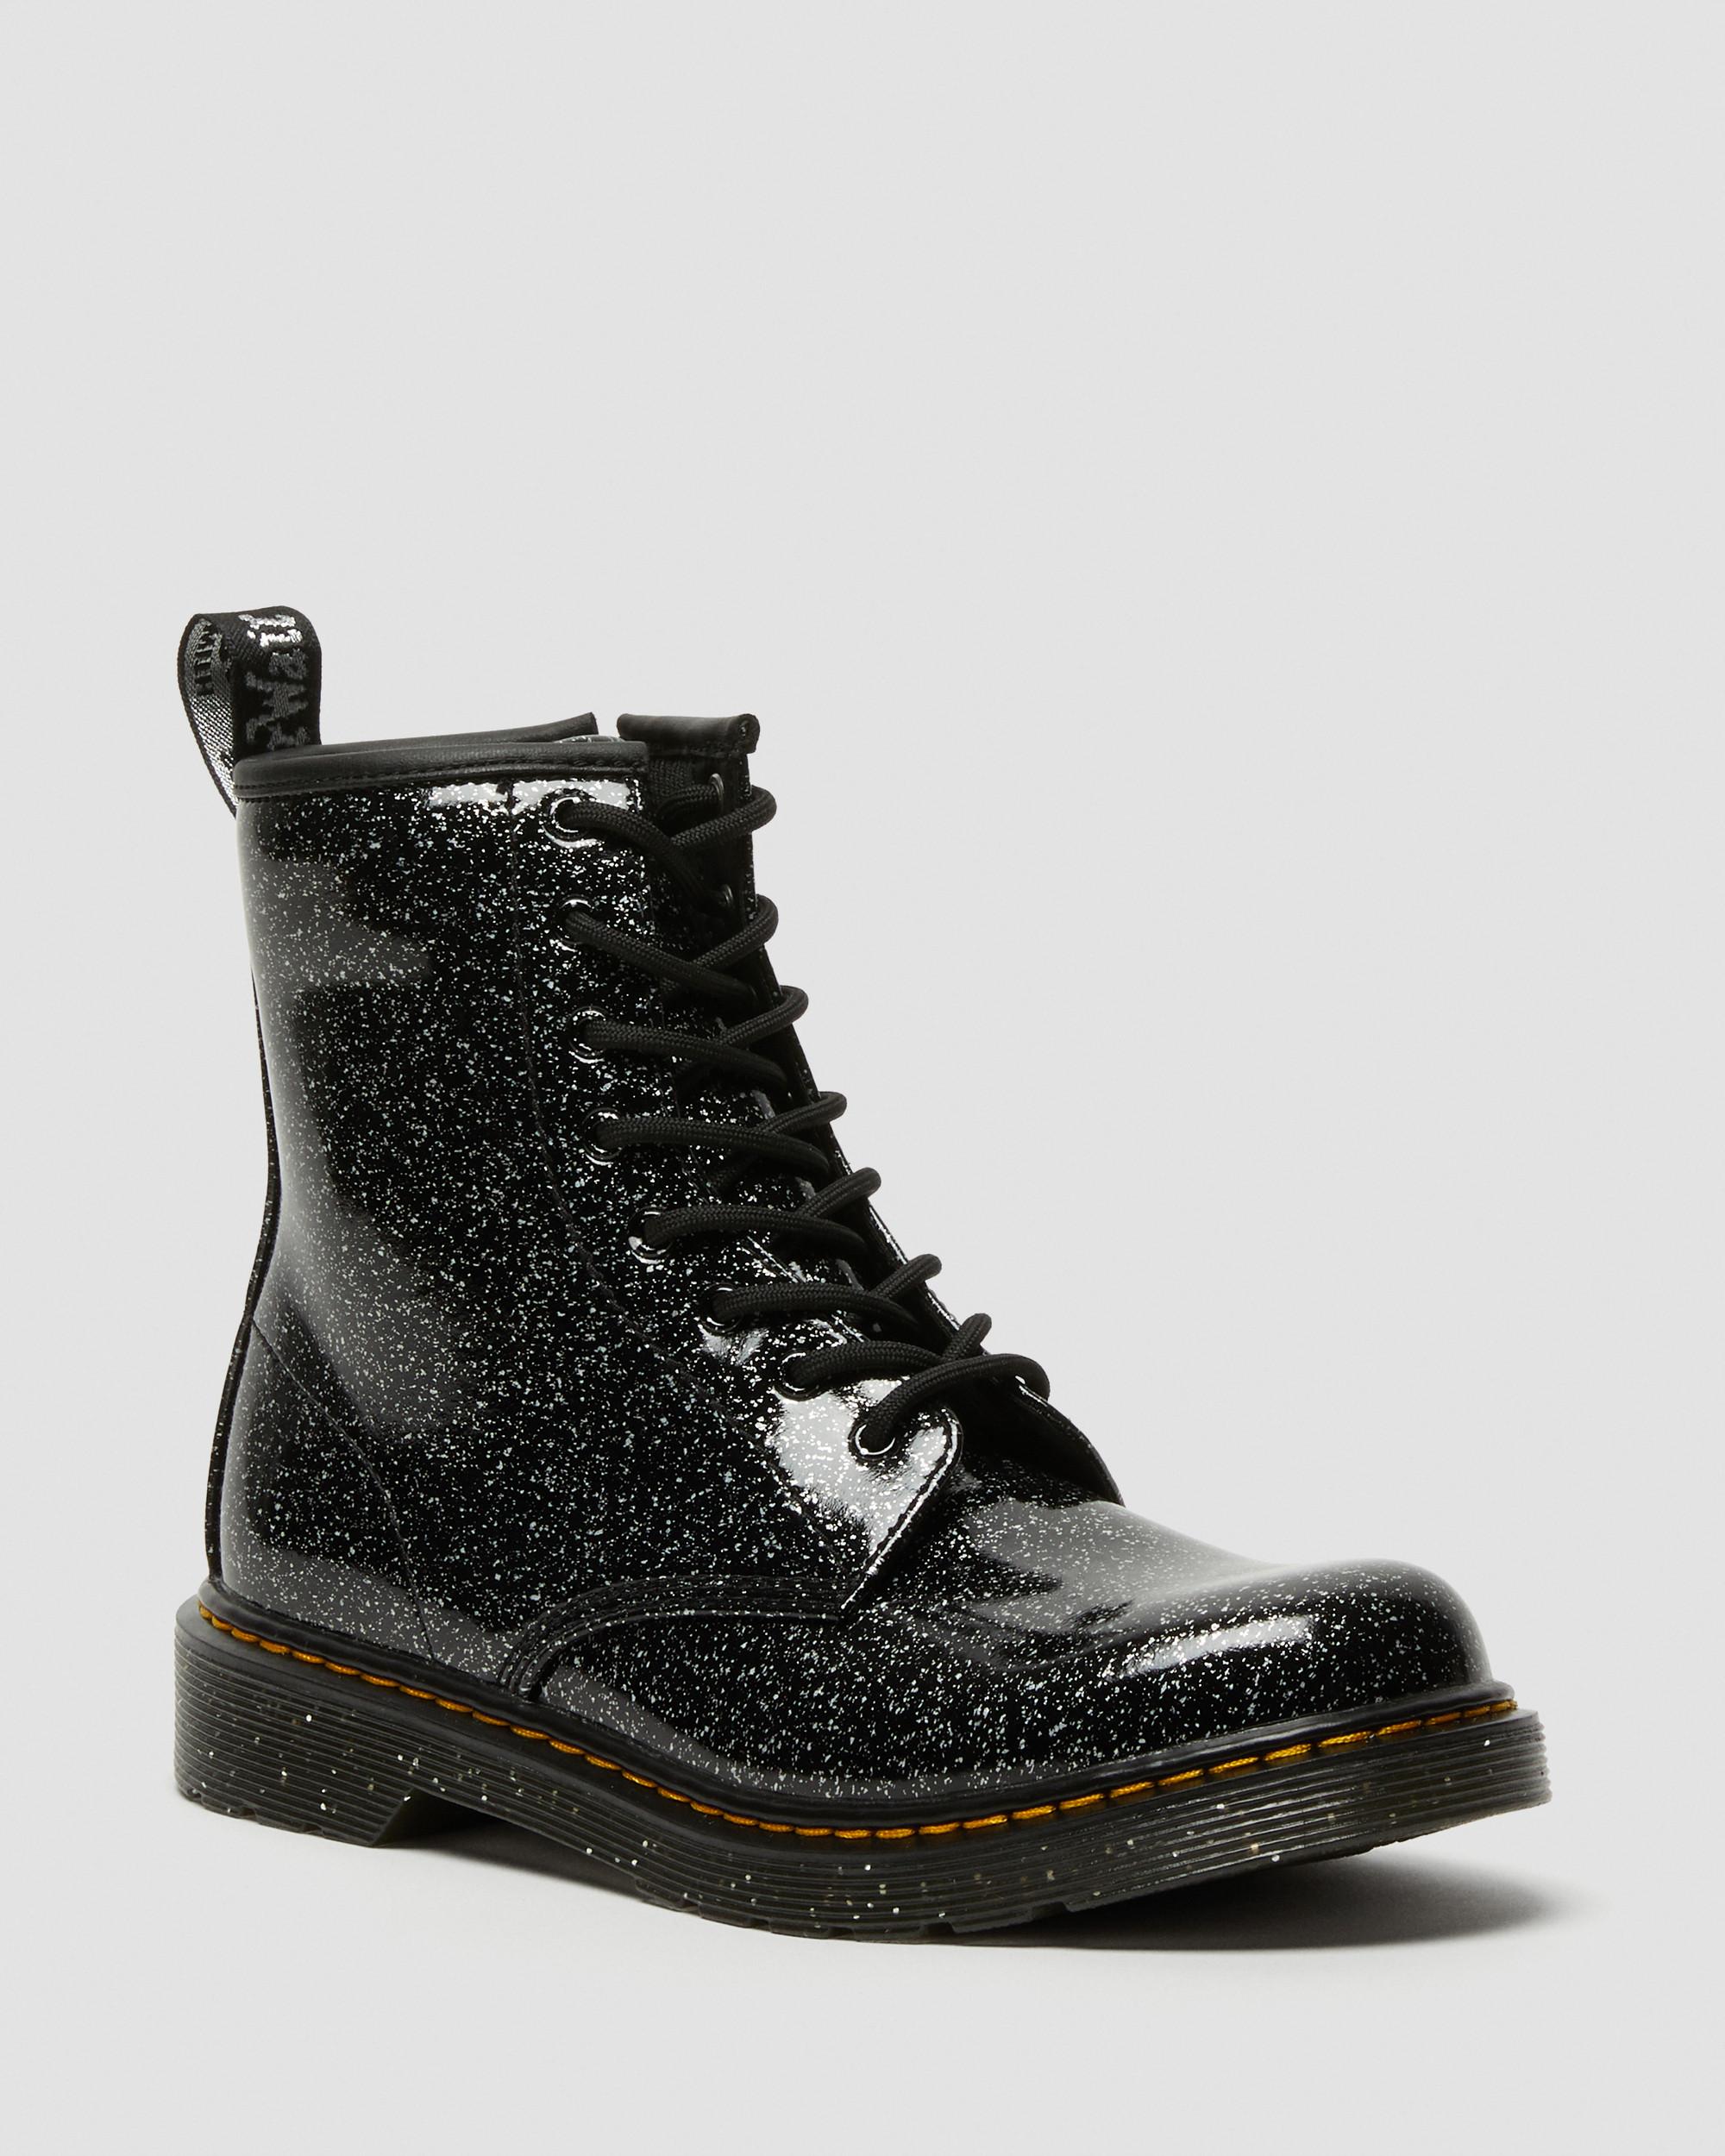 Youth Sinclair Bex Patent Leather Boots in Black | Dr. Martens